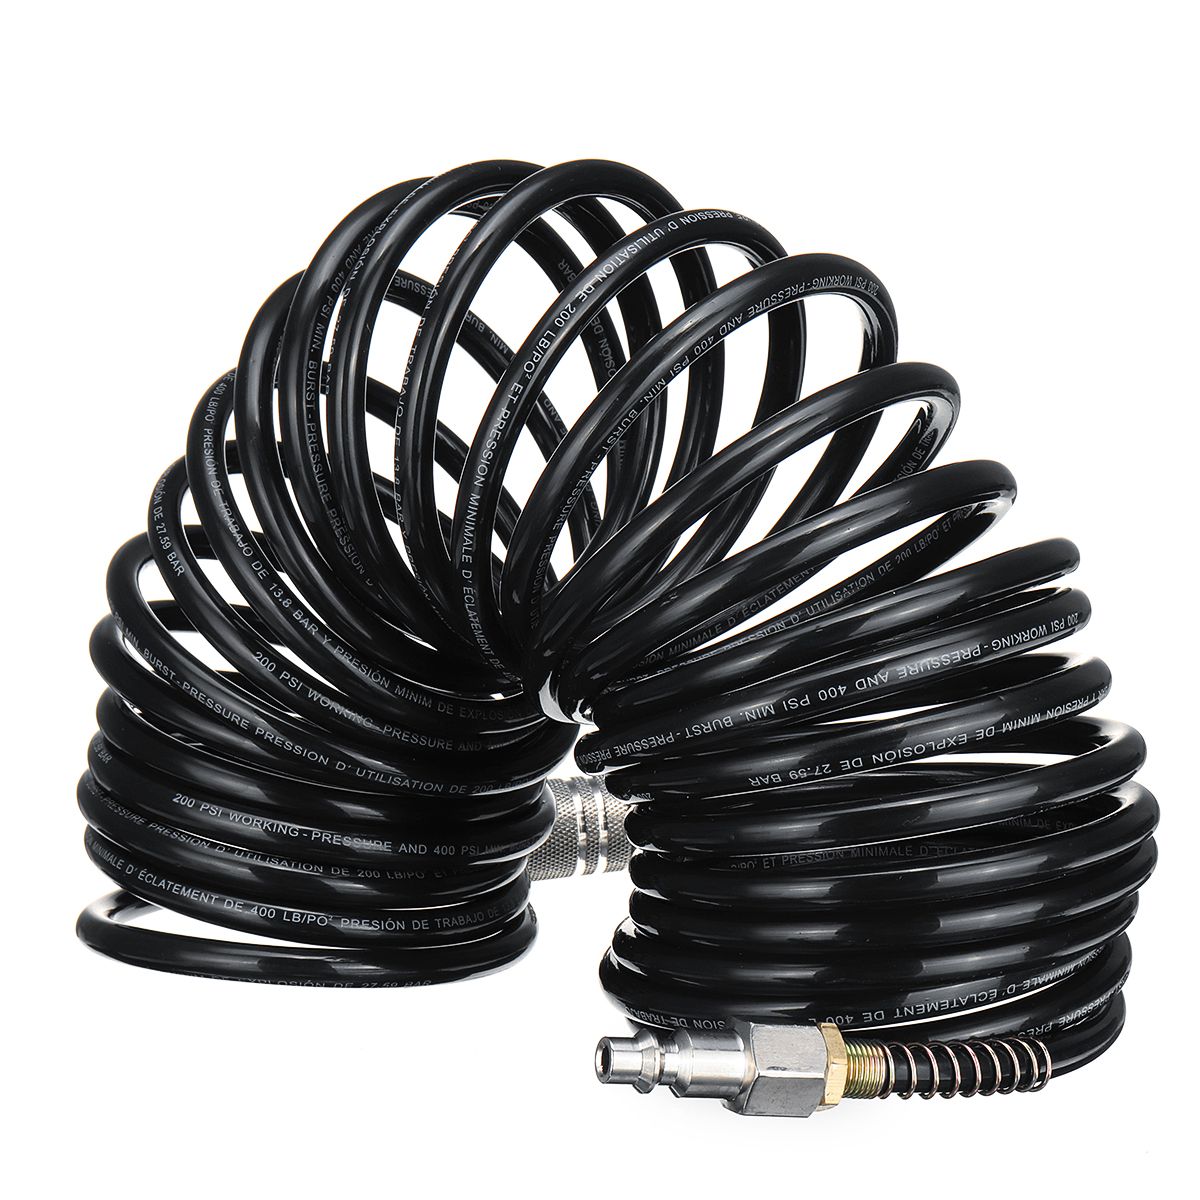 25FT-Air-Hose-Fittings-Recoil-Pneumatic-Airline-Compressor-200PSI-Quick-Coupler-1323414